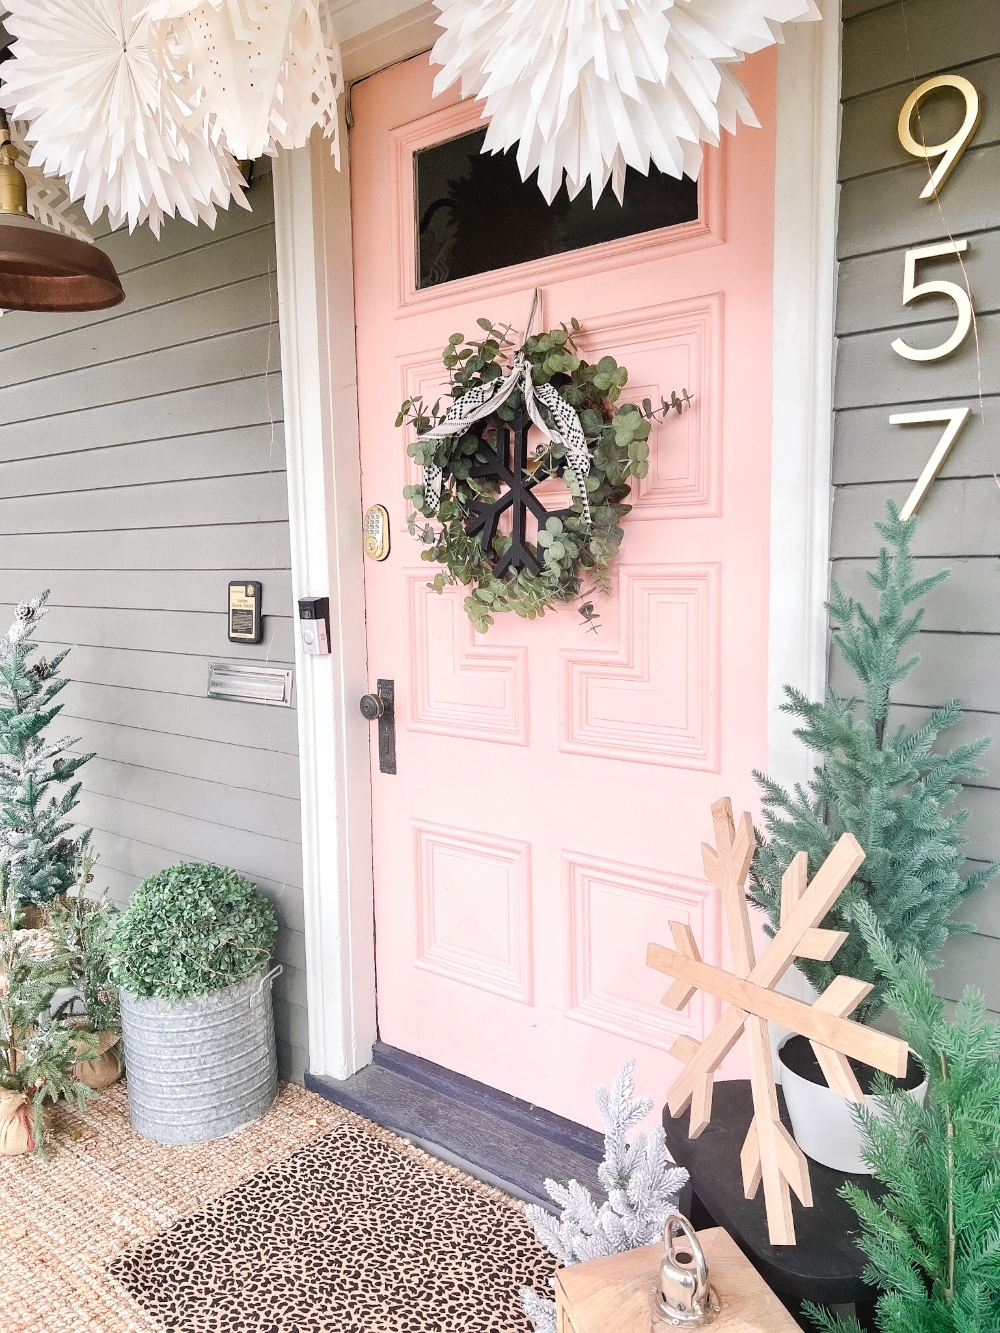 Snowflake Winter Wreath - Three Ways! I took my favorite wood DIY snowflake and showed how to use it to create THREE easy winter wreaths!